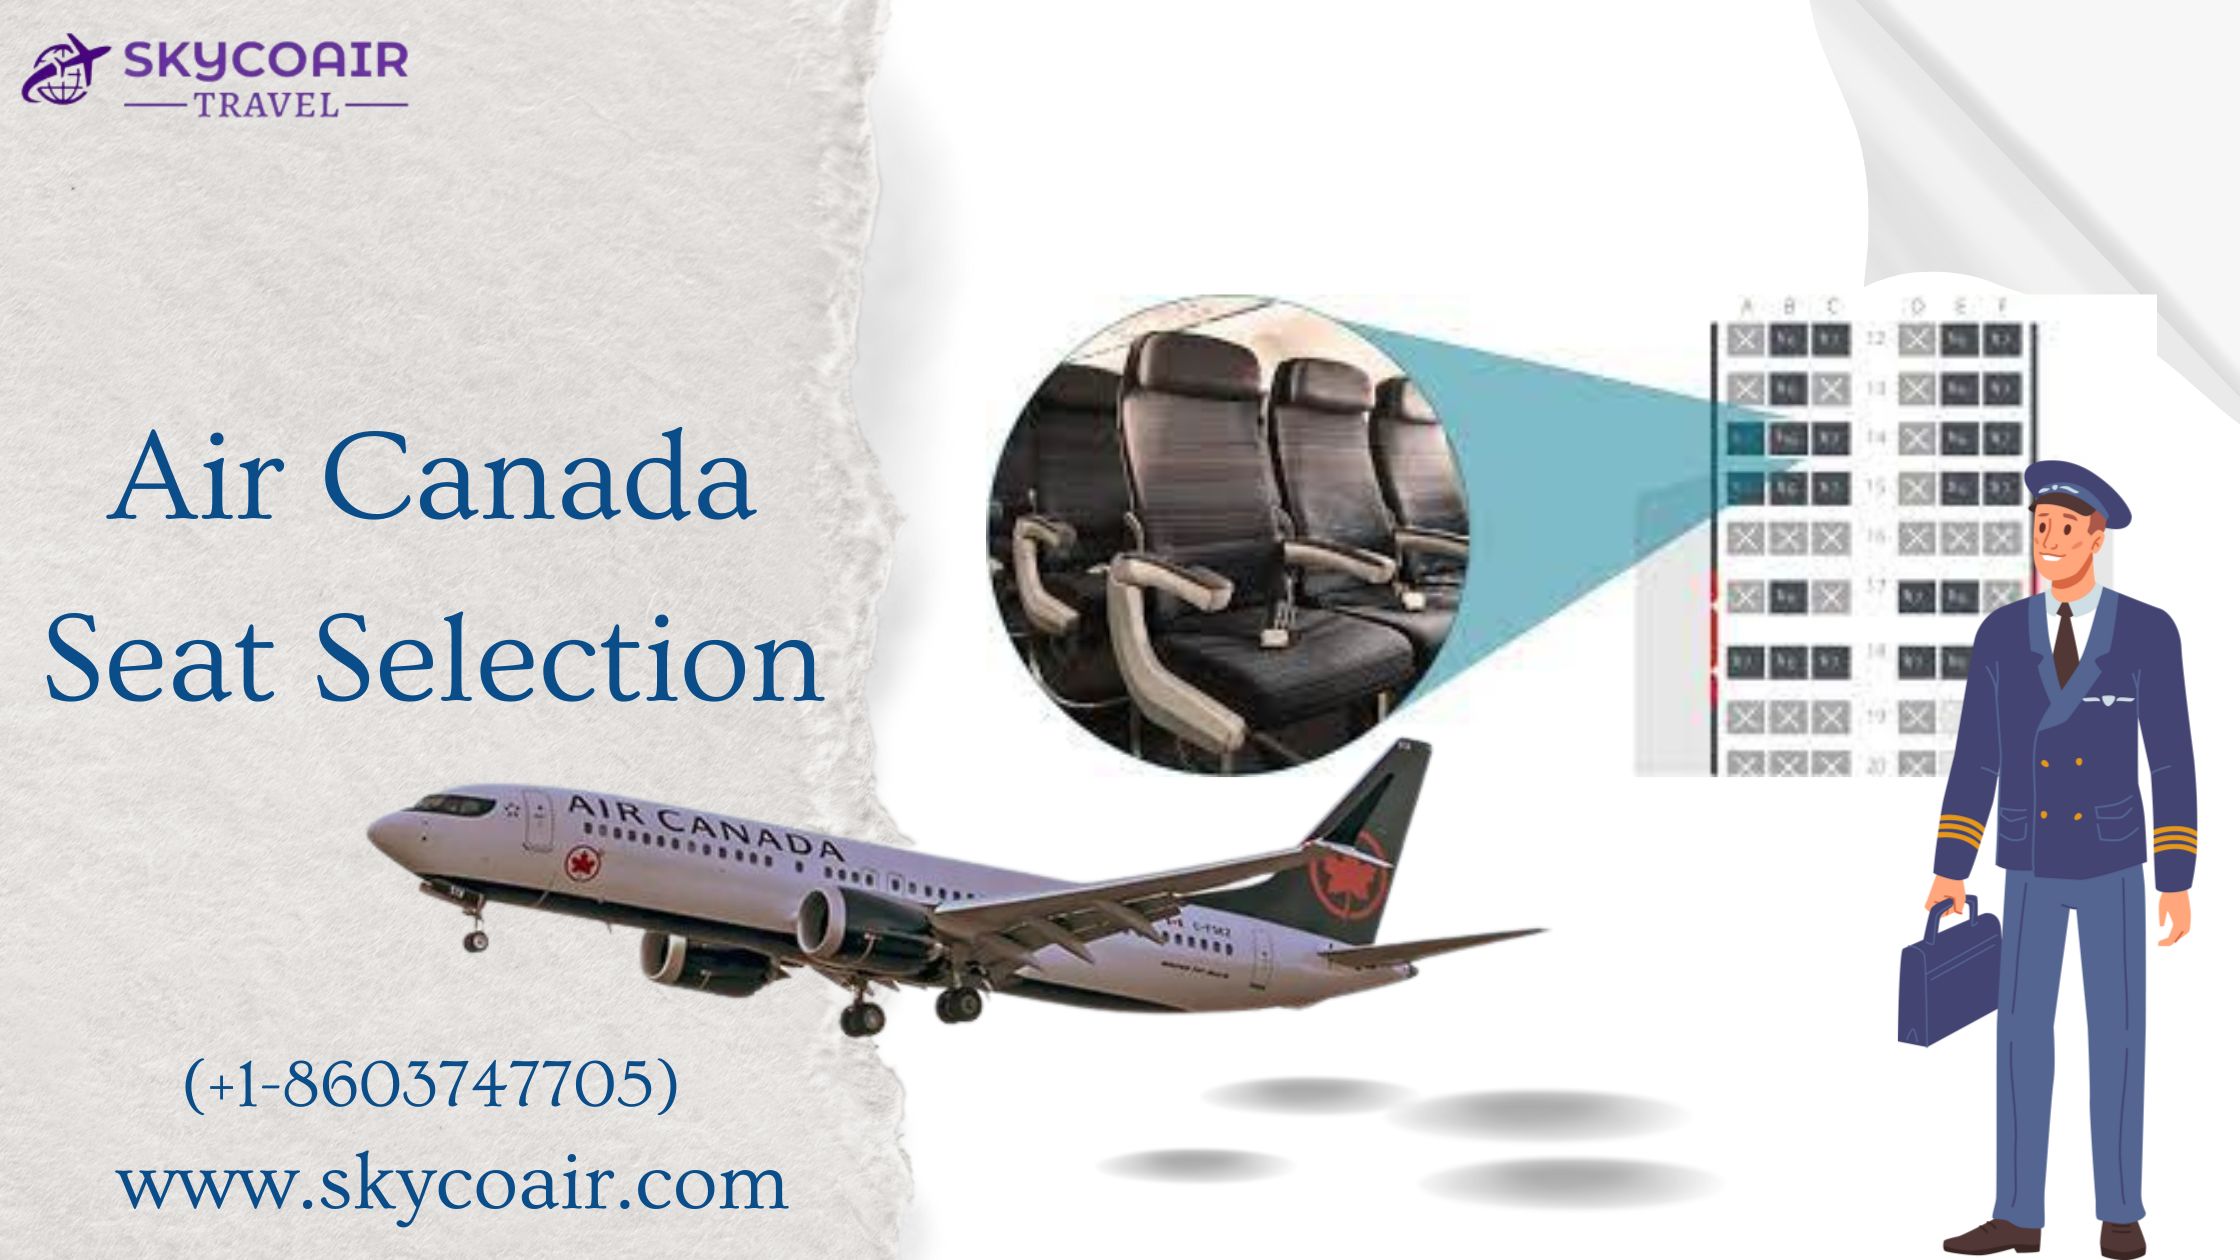 Air Canada Seat Selection